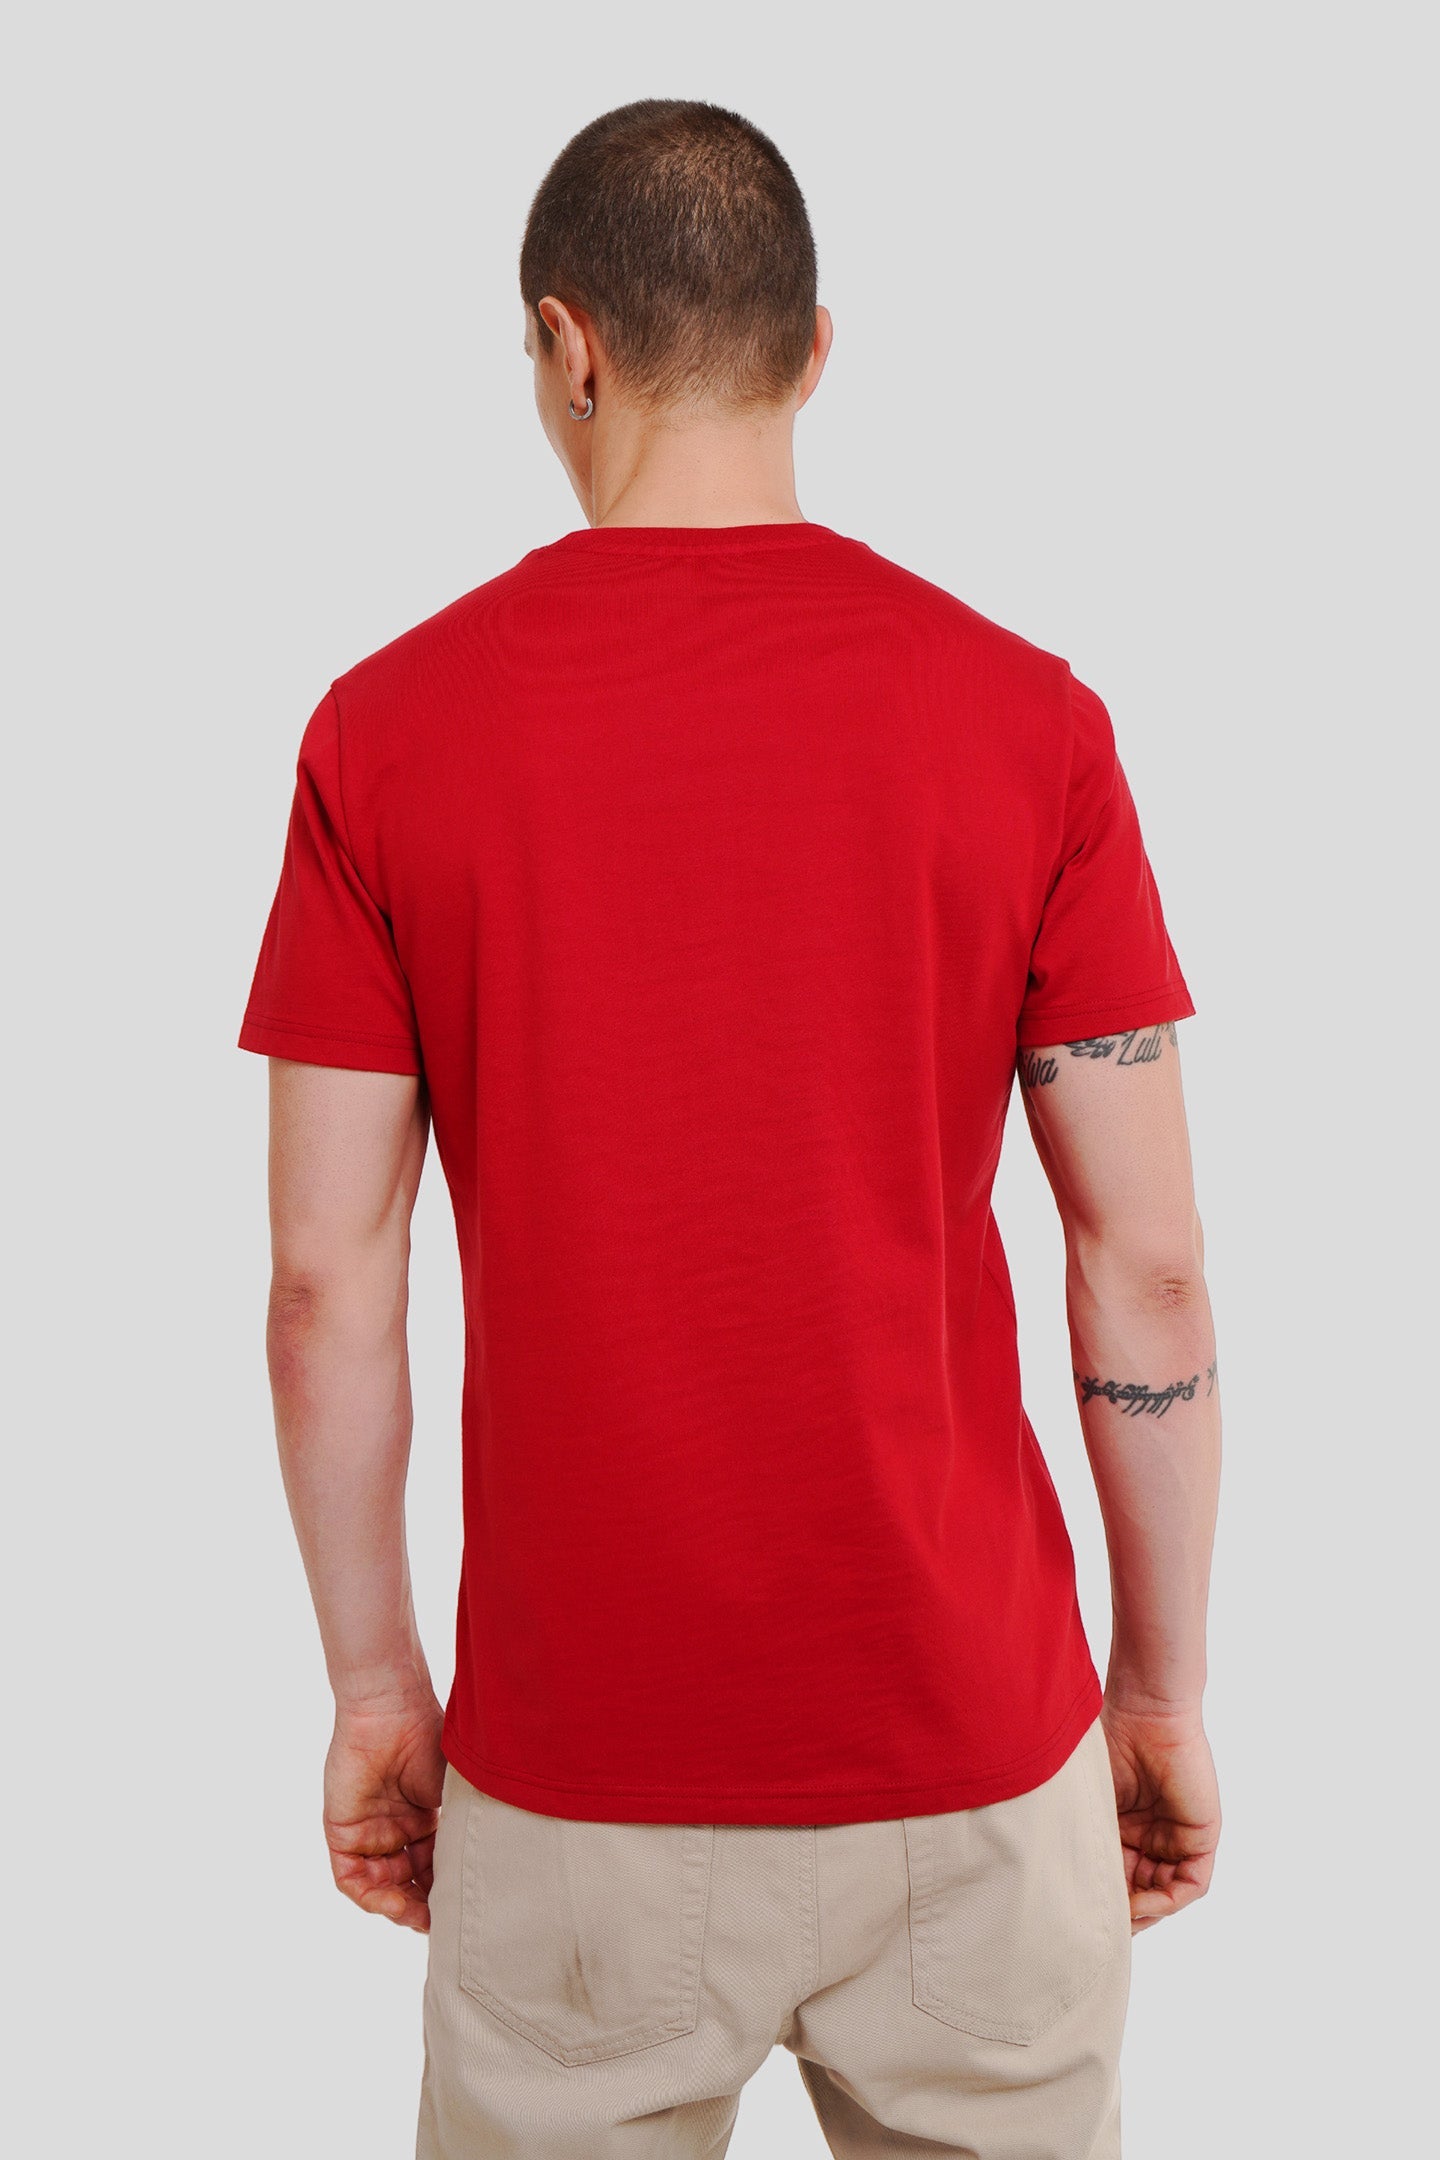 Never Give Up Red Printed T Shirt Men Regular Fit With Front Design Pic 2